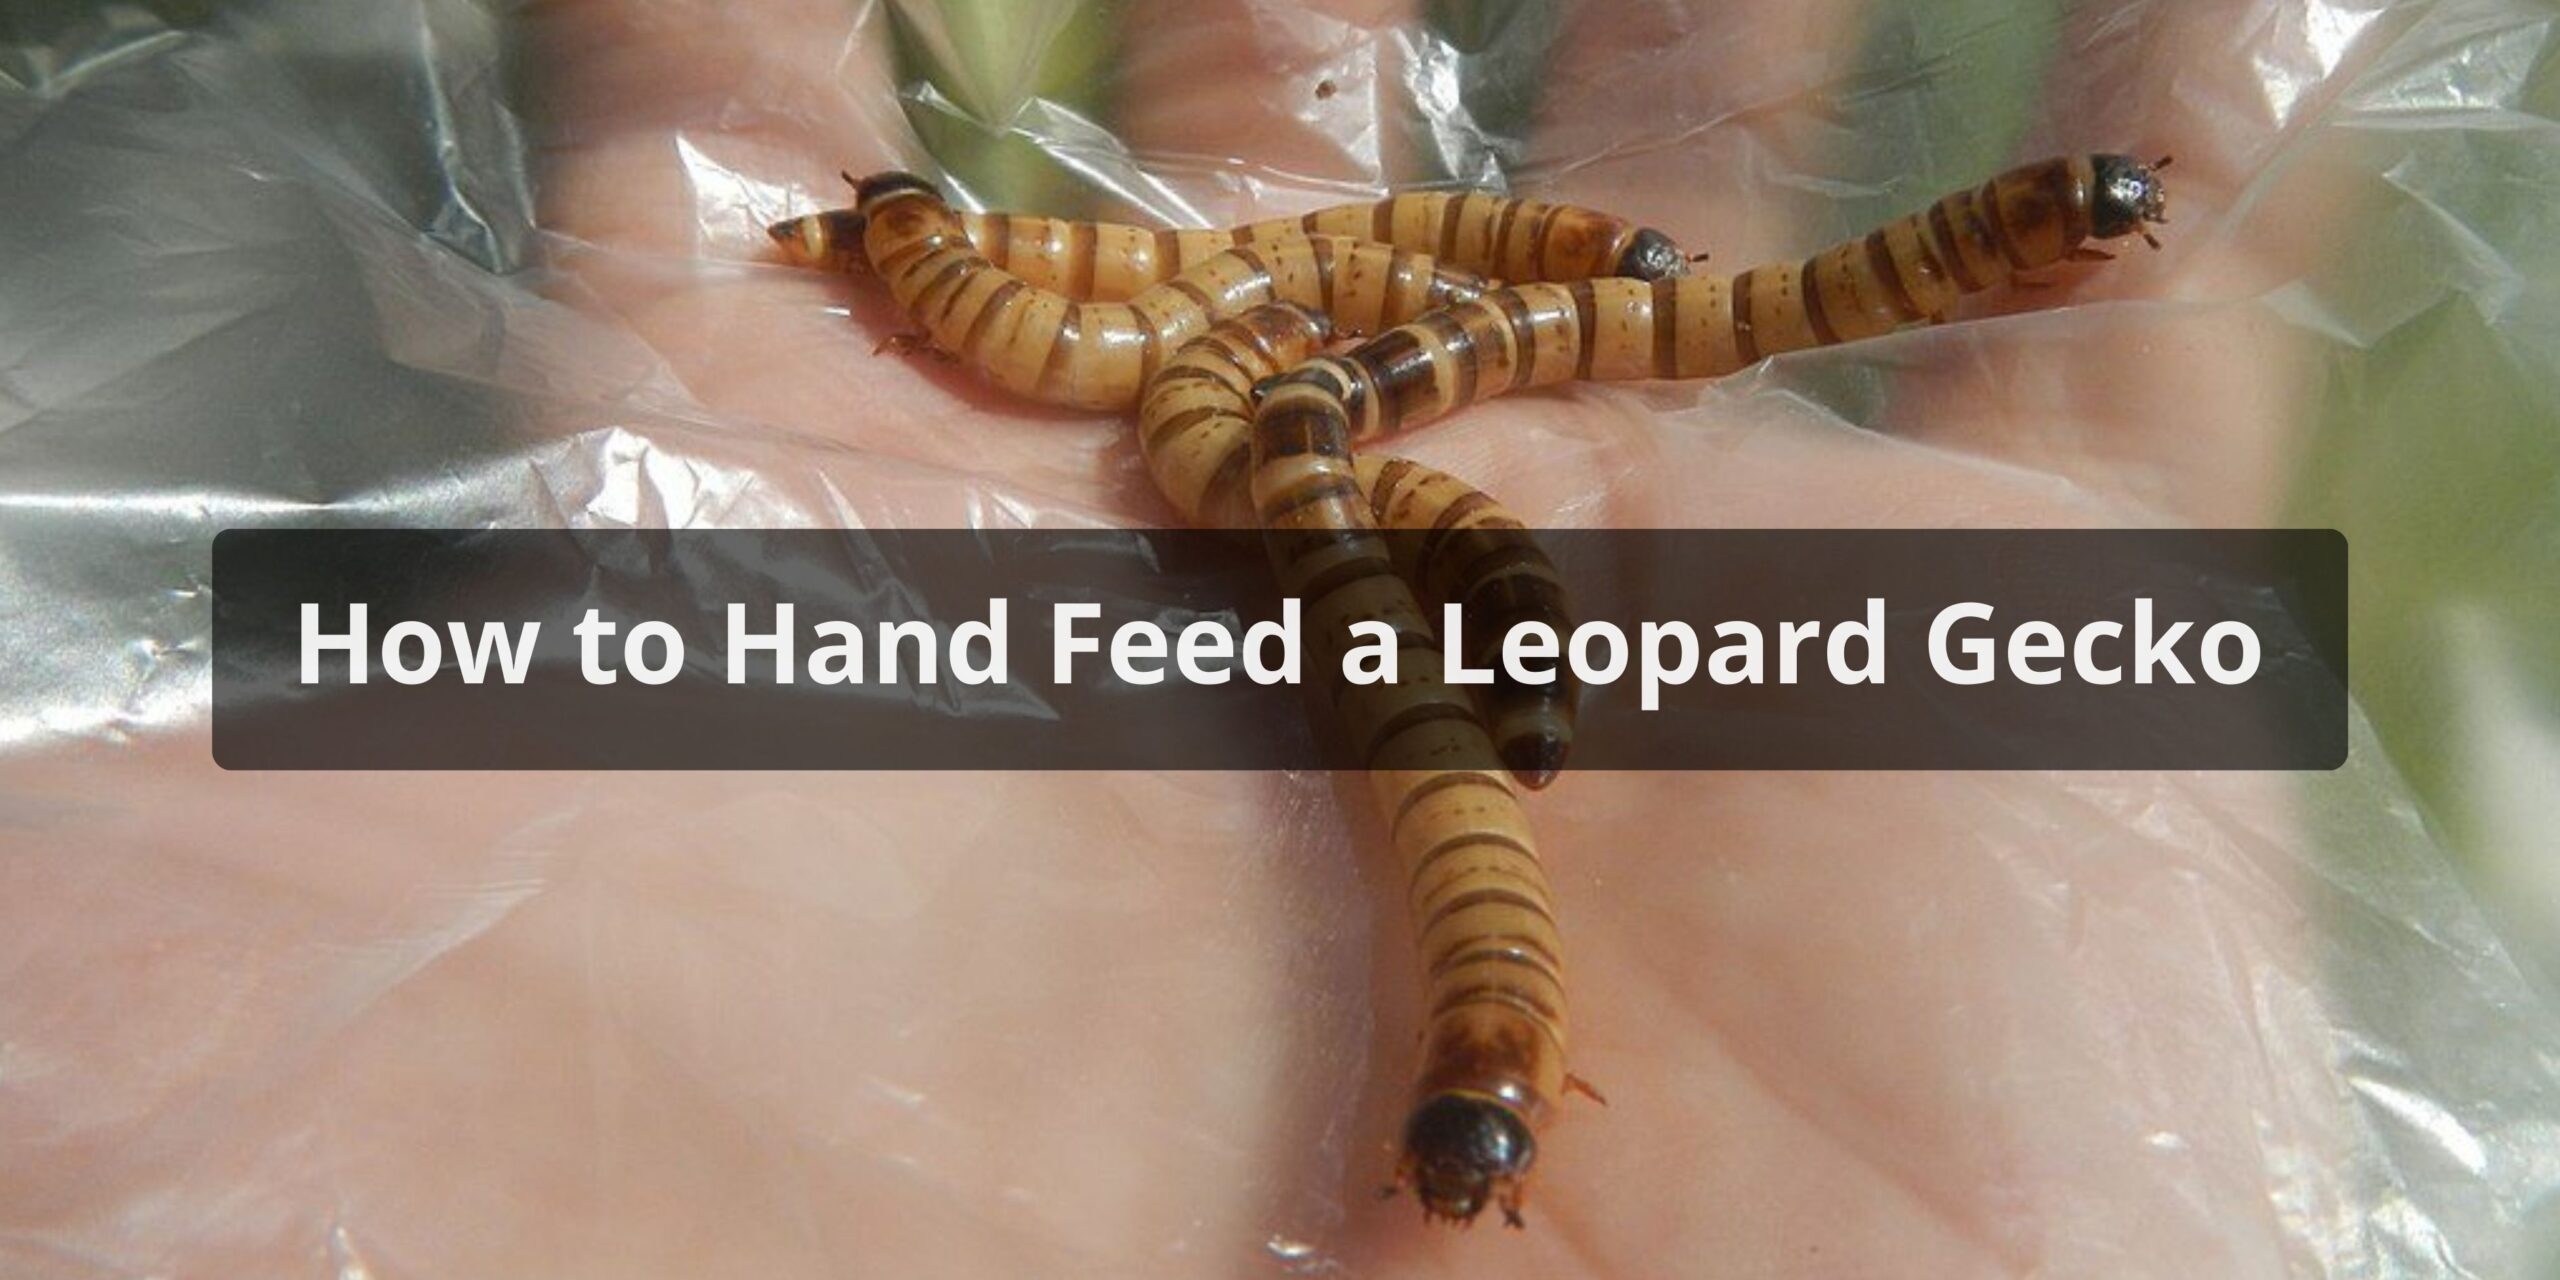 How to Hand Feed a Leopard Gecko